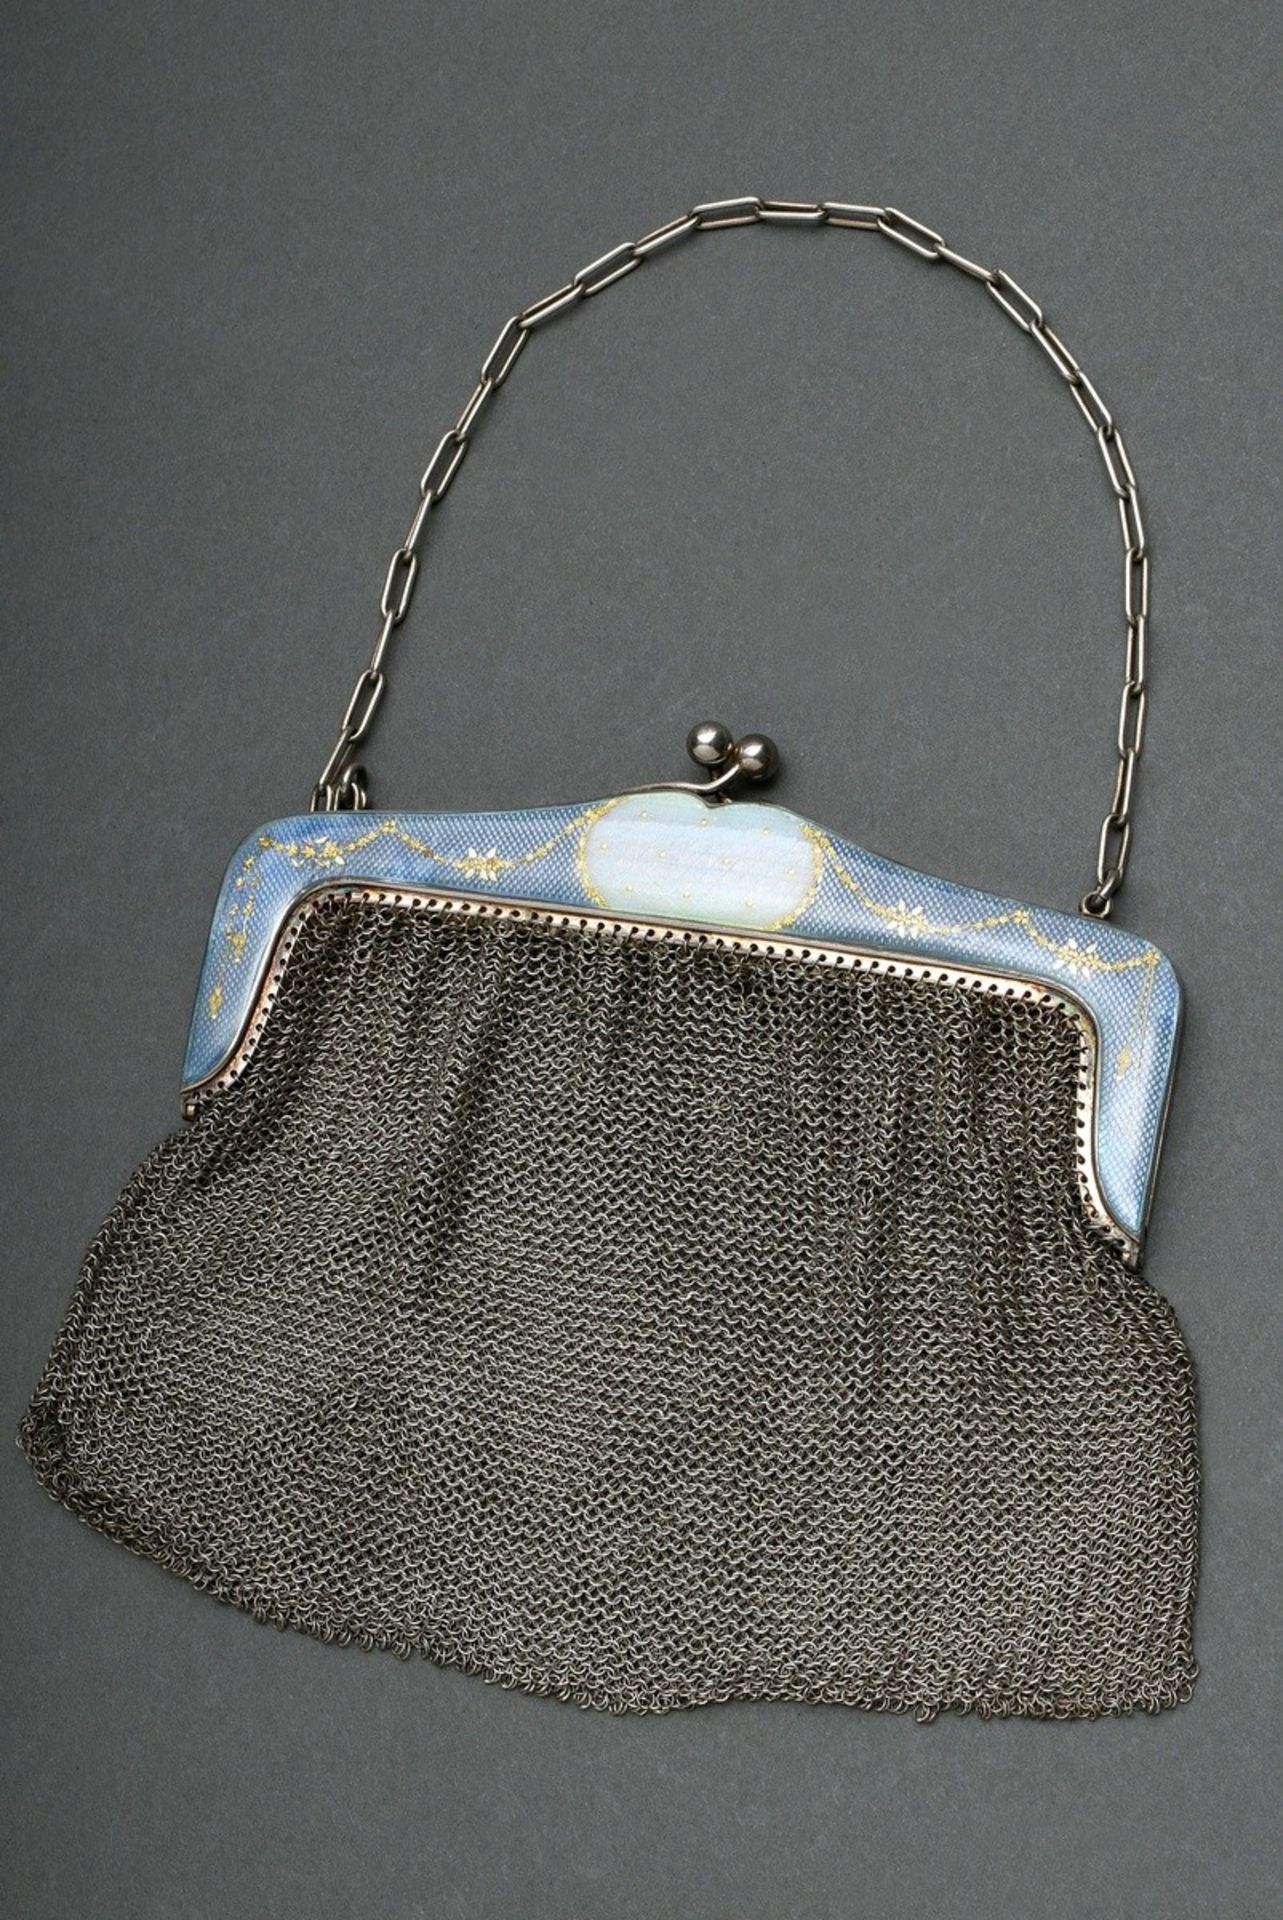 Evening bag with braided silver wire and light blue guilloché enamel handle with gold garlands, ind